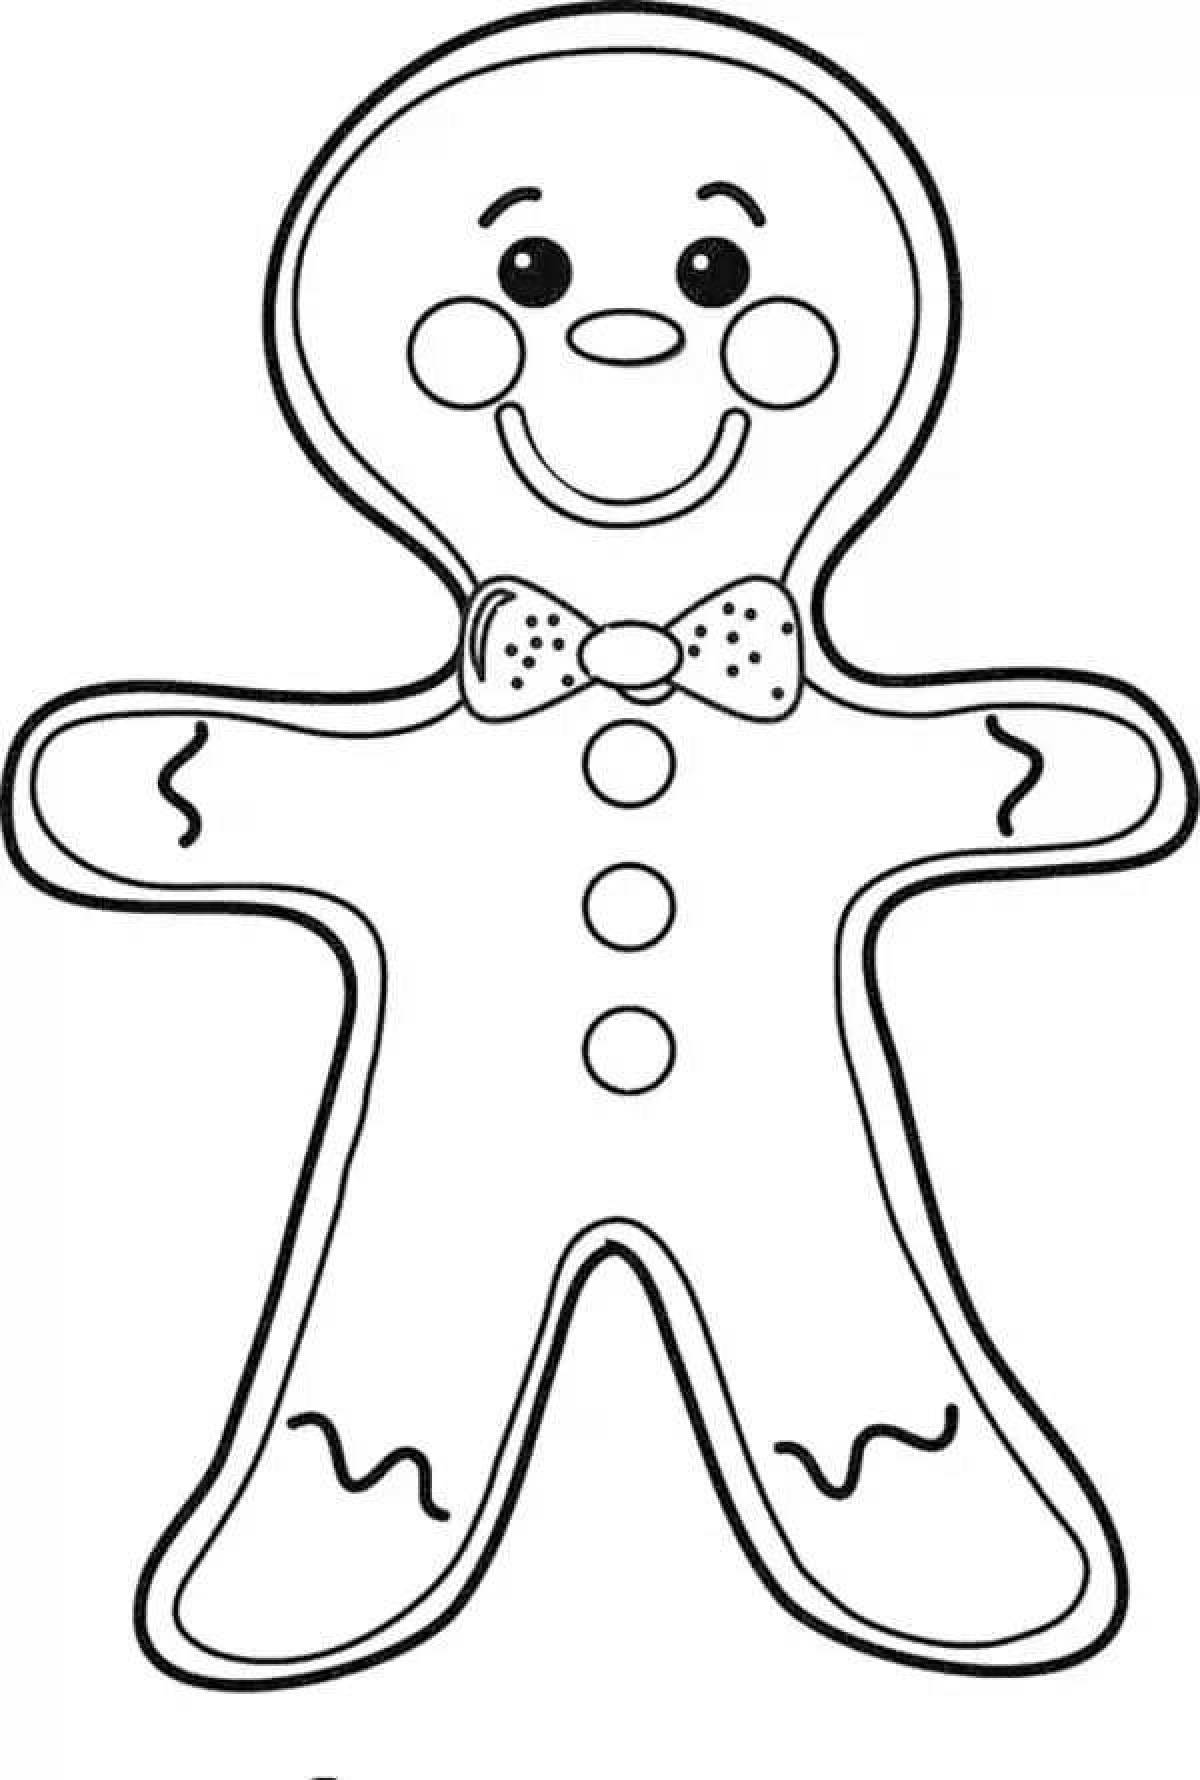 Glitter gingerbread coloring page